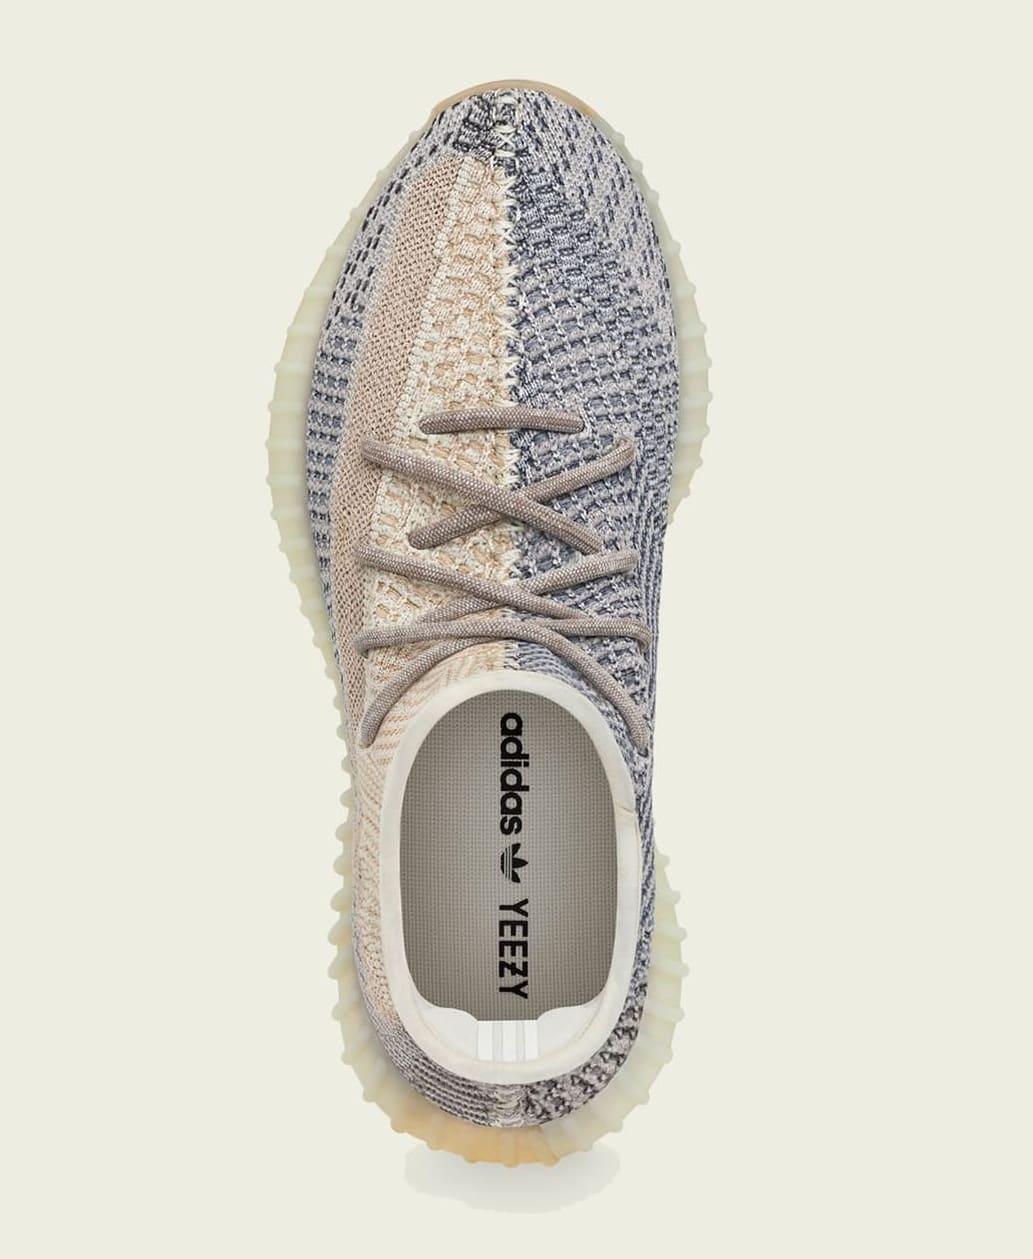 'Ash Pearl' Adidas Yeezy Boost 350 V2s Are Dropping This Week | Complex